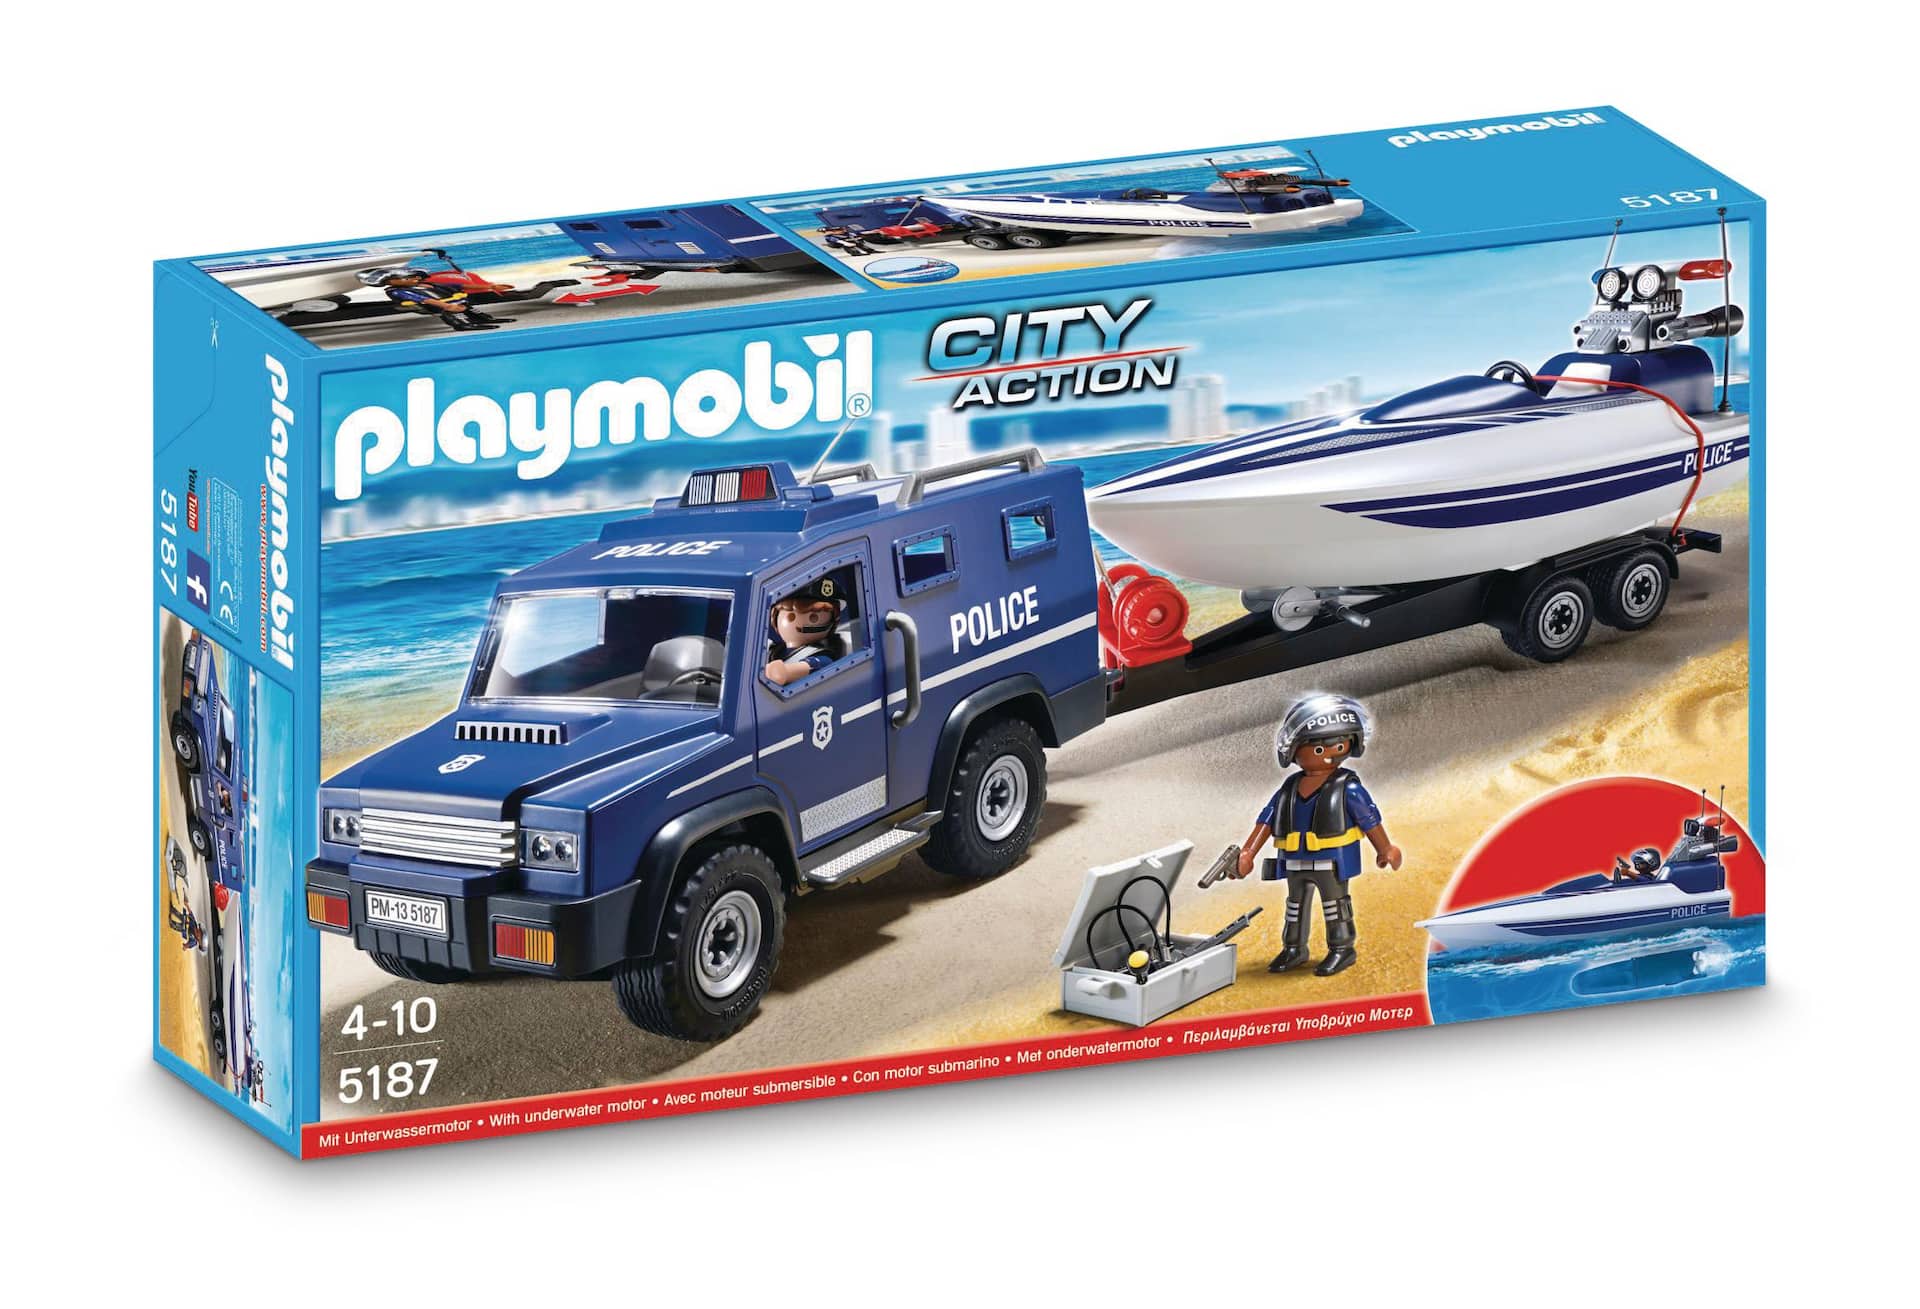 PLAYMOBIL City Action Police Carry Motorcycle Play Vehicle Playset, for  children 4 years and older.